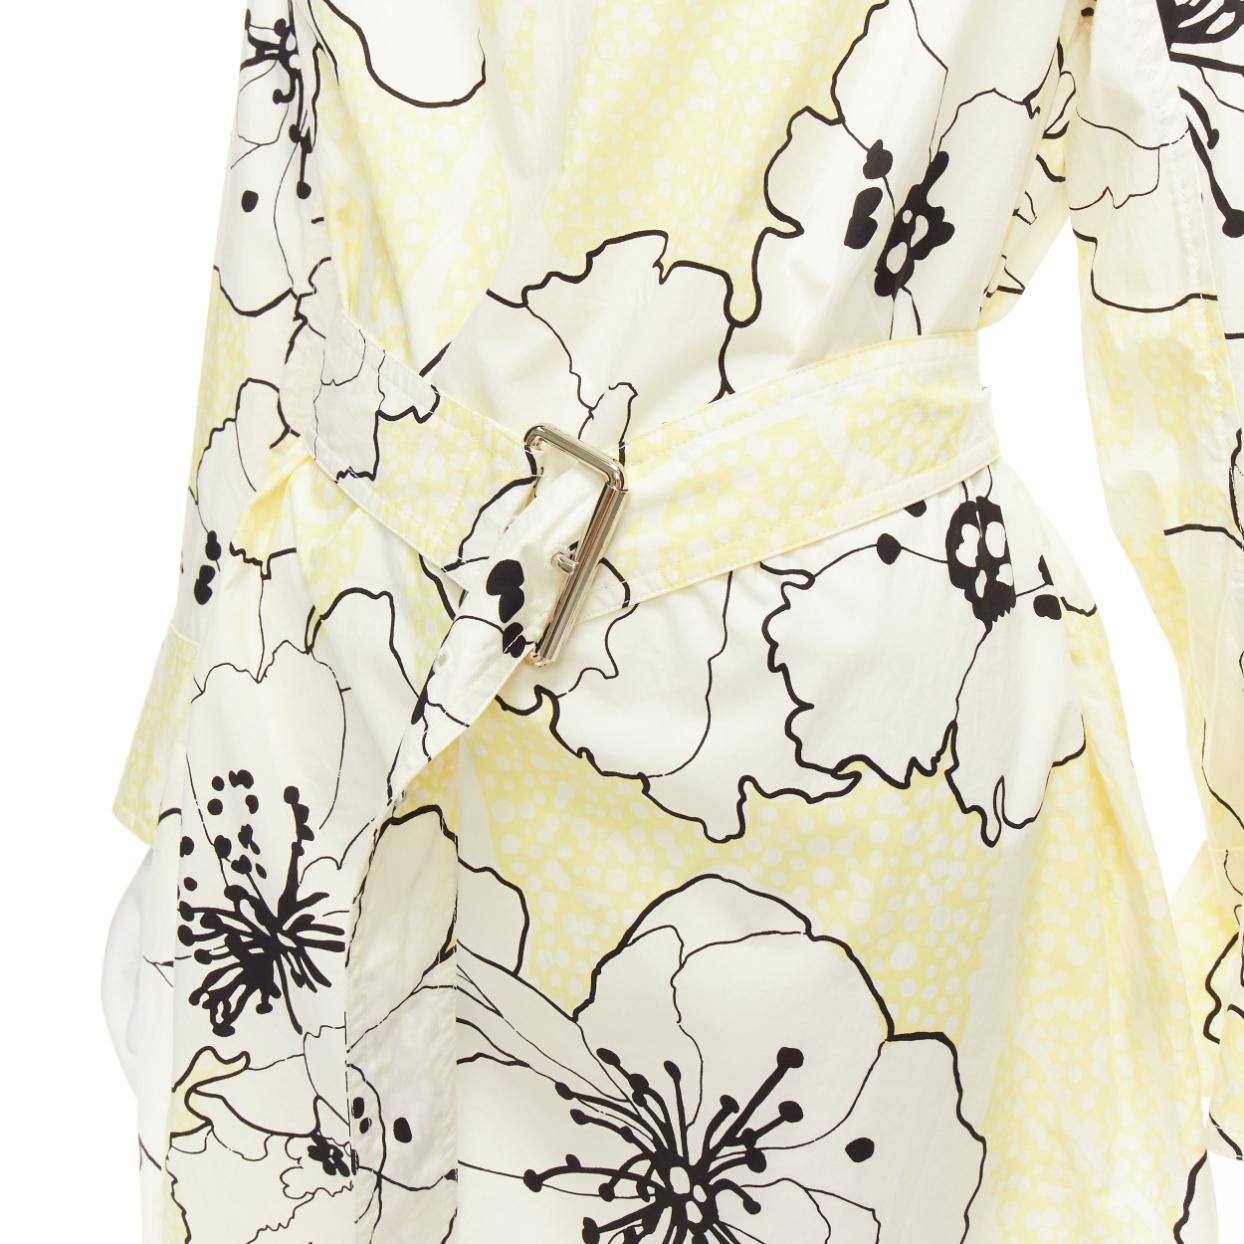 MARNI yellow white 100% cotton floral print belted cowl neck dress IT36 XXS
Reference: CELG/A00421
Brand: Marni
Material: Cotton
Color: Yellow, White
Pattern: Floral
Closure: Belt
Extra Details: Cowl neck with button closure at top. Belt can be worn